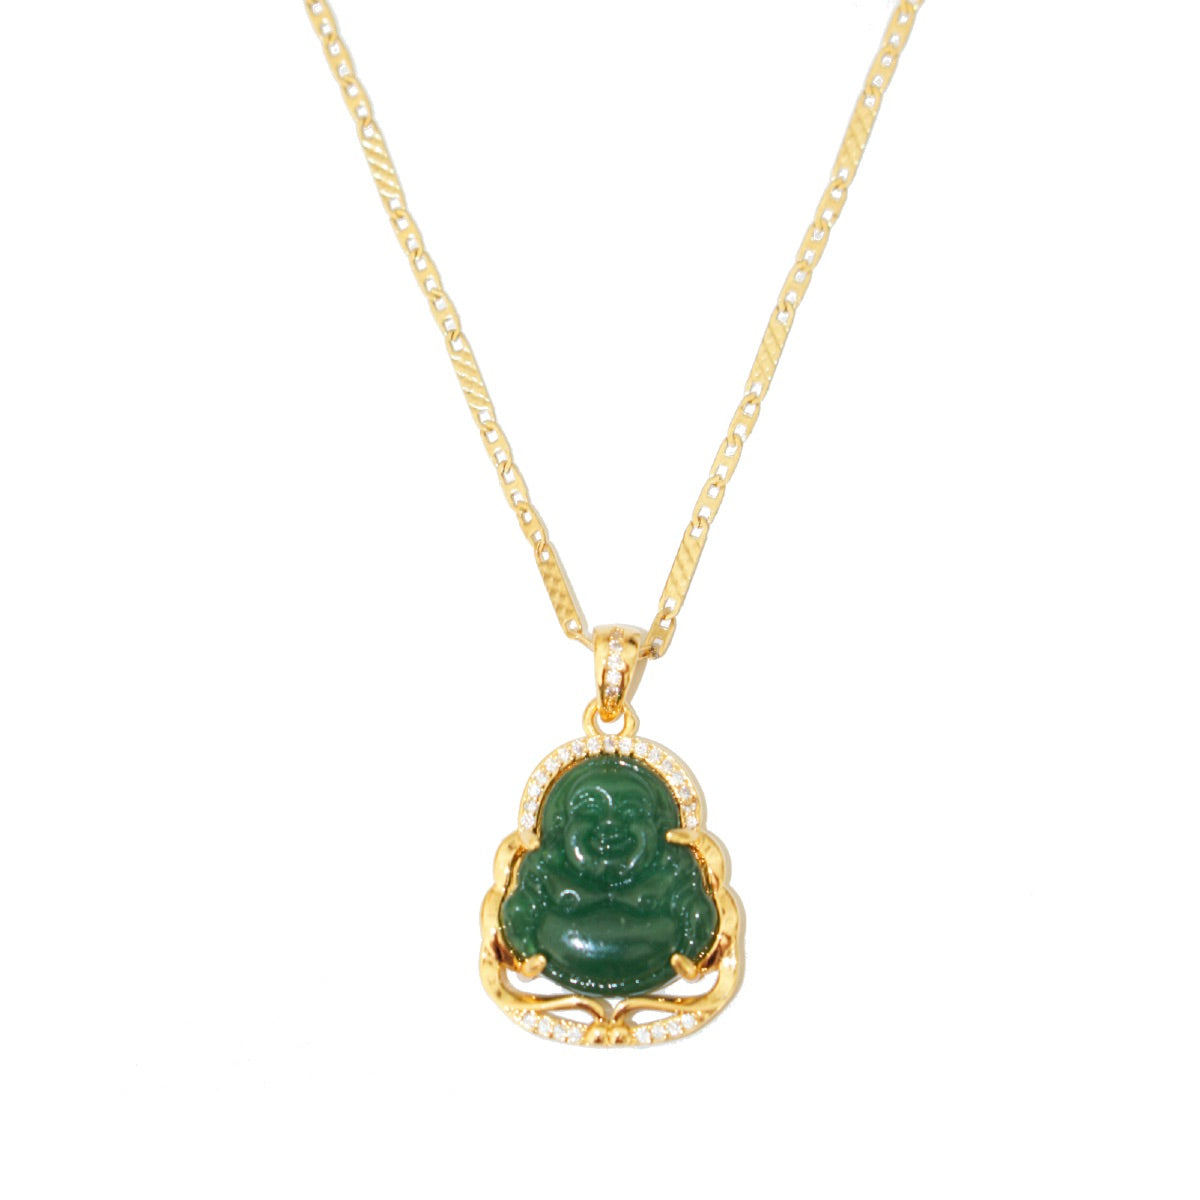 Beautiful Emerald Green Jade Buddha Pendant 18K Gold Plated Necklace Real  Jade Wealth Good Luck Protection Sense-of-wellbeing Gift for Her - Etsy | Buddha  pendant, Buddha pendant necklace, Pendant